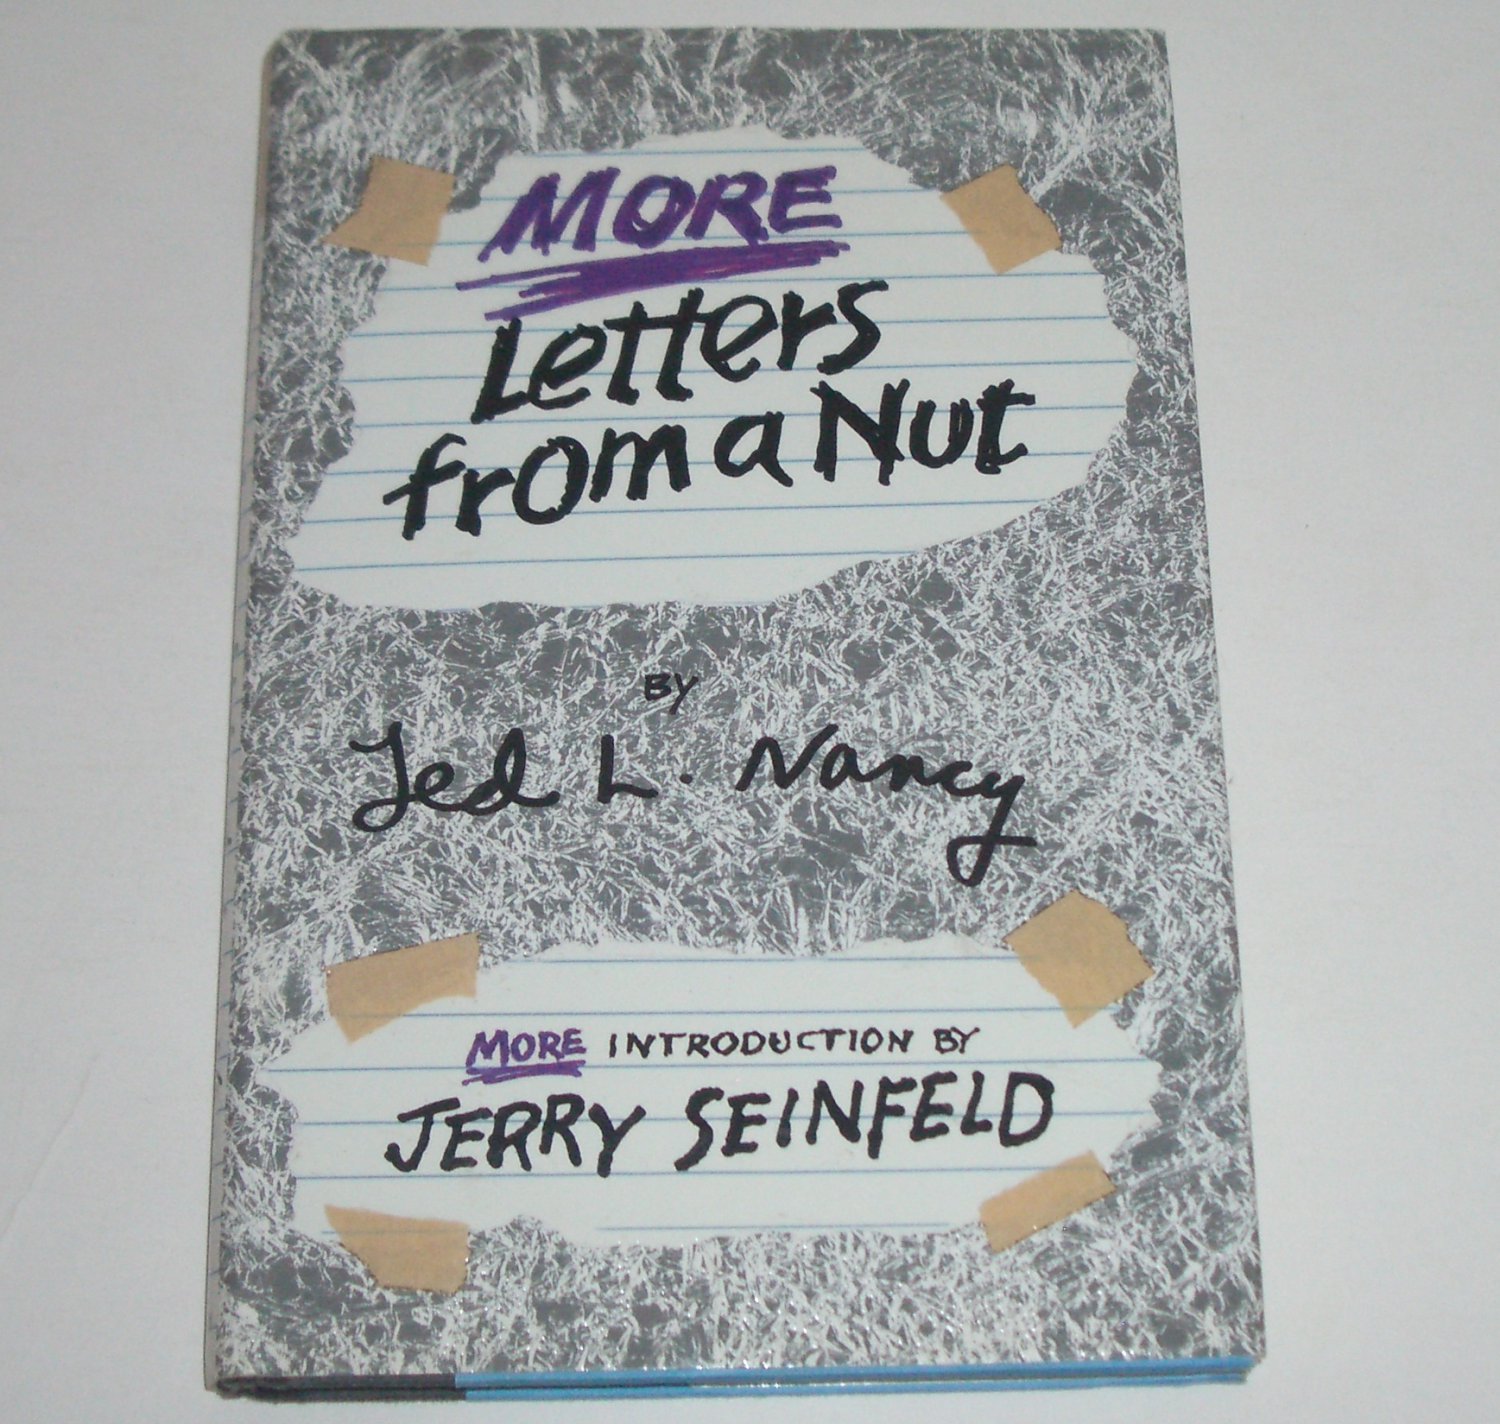 More Letters From a Nut by Ted L. Nancy 1999 Hardcover with Dust Jacket Humor